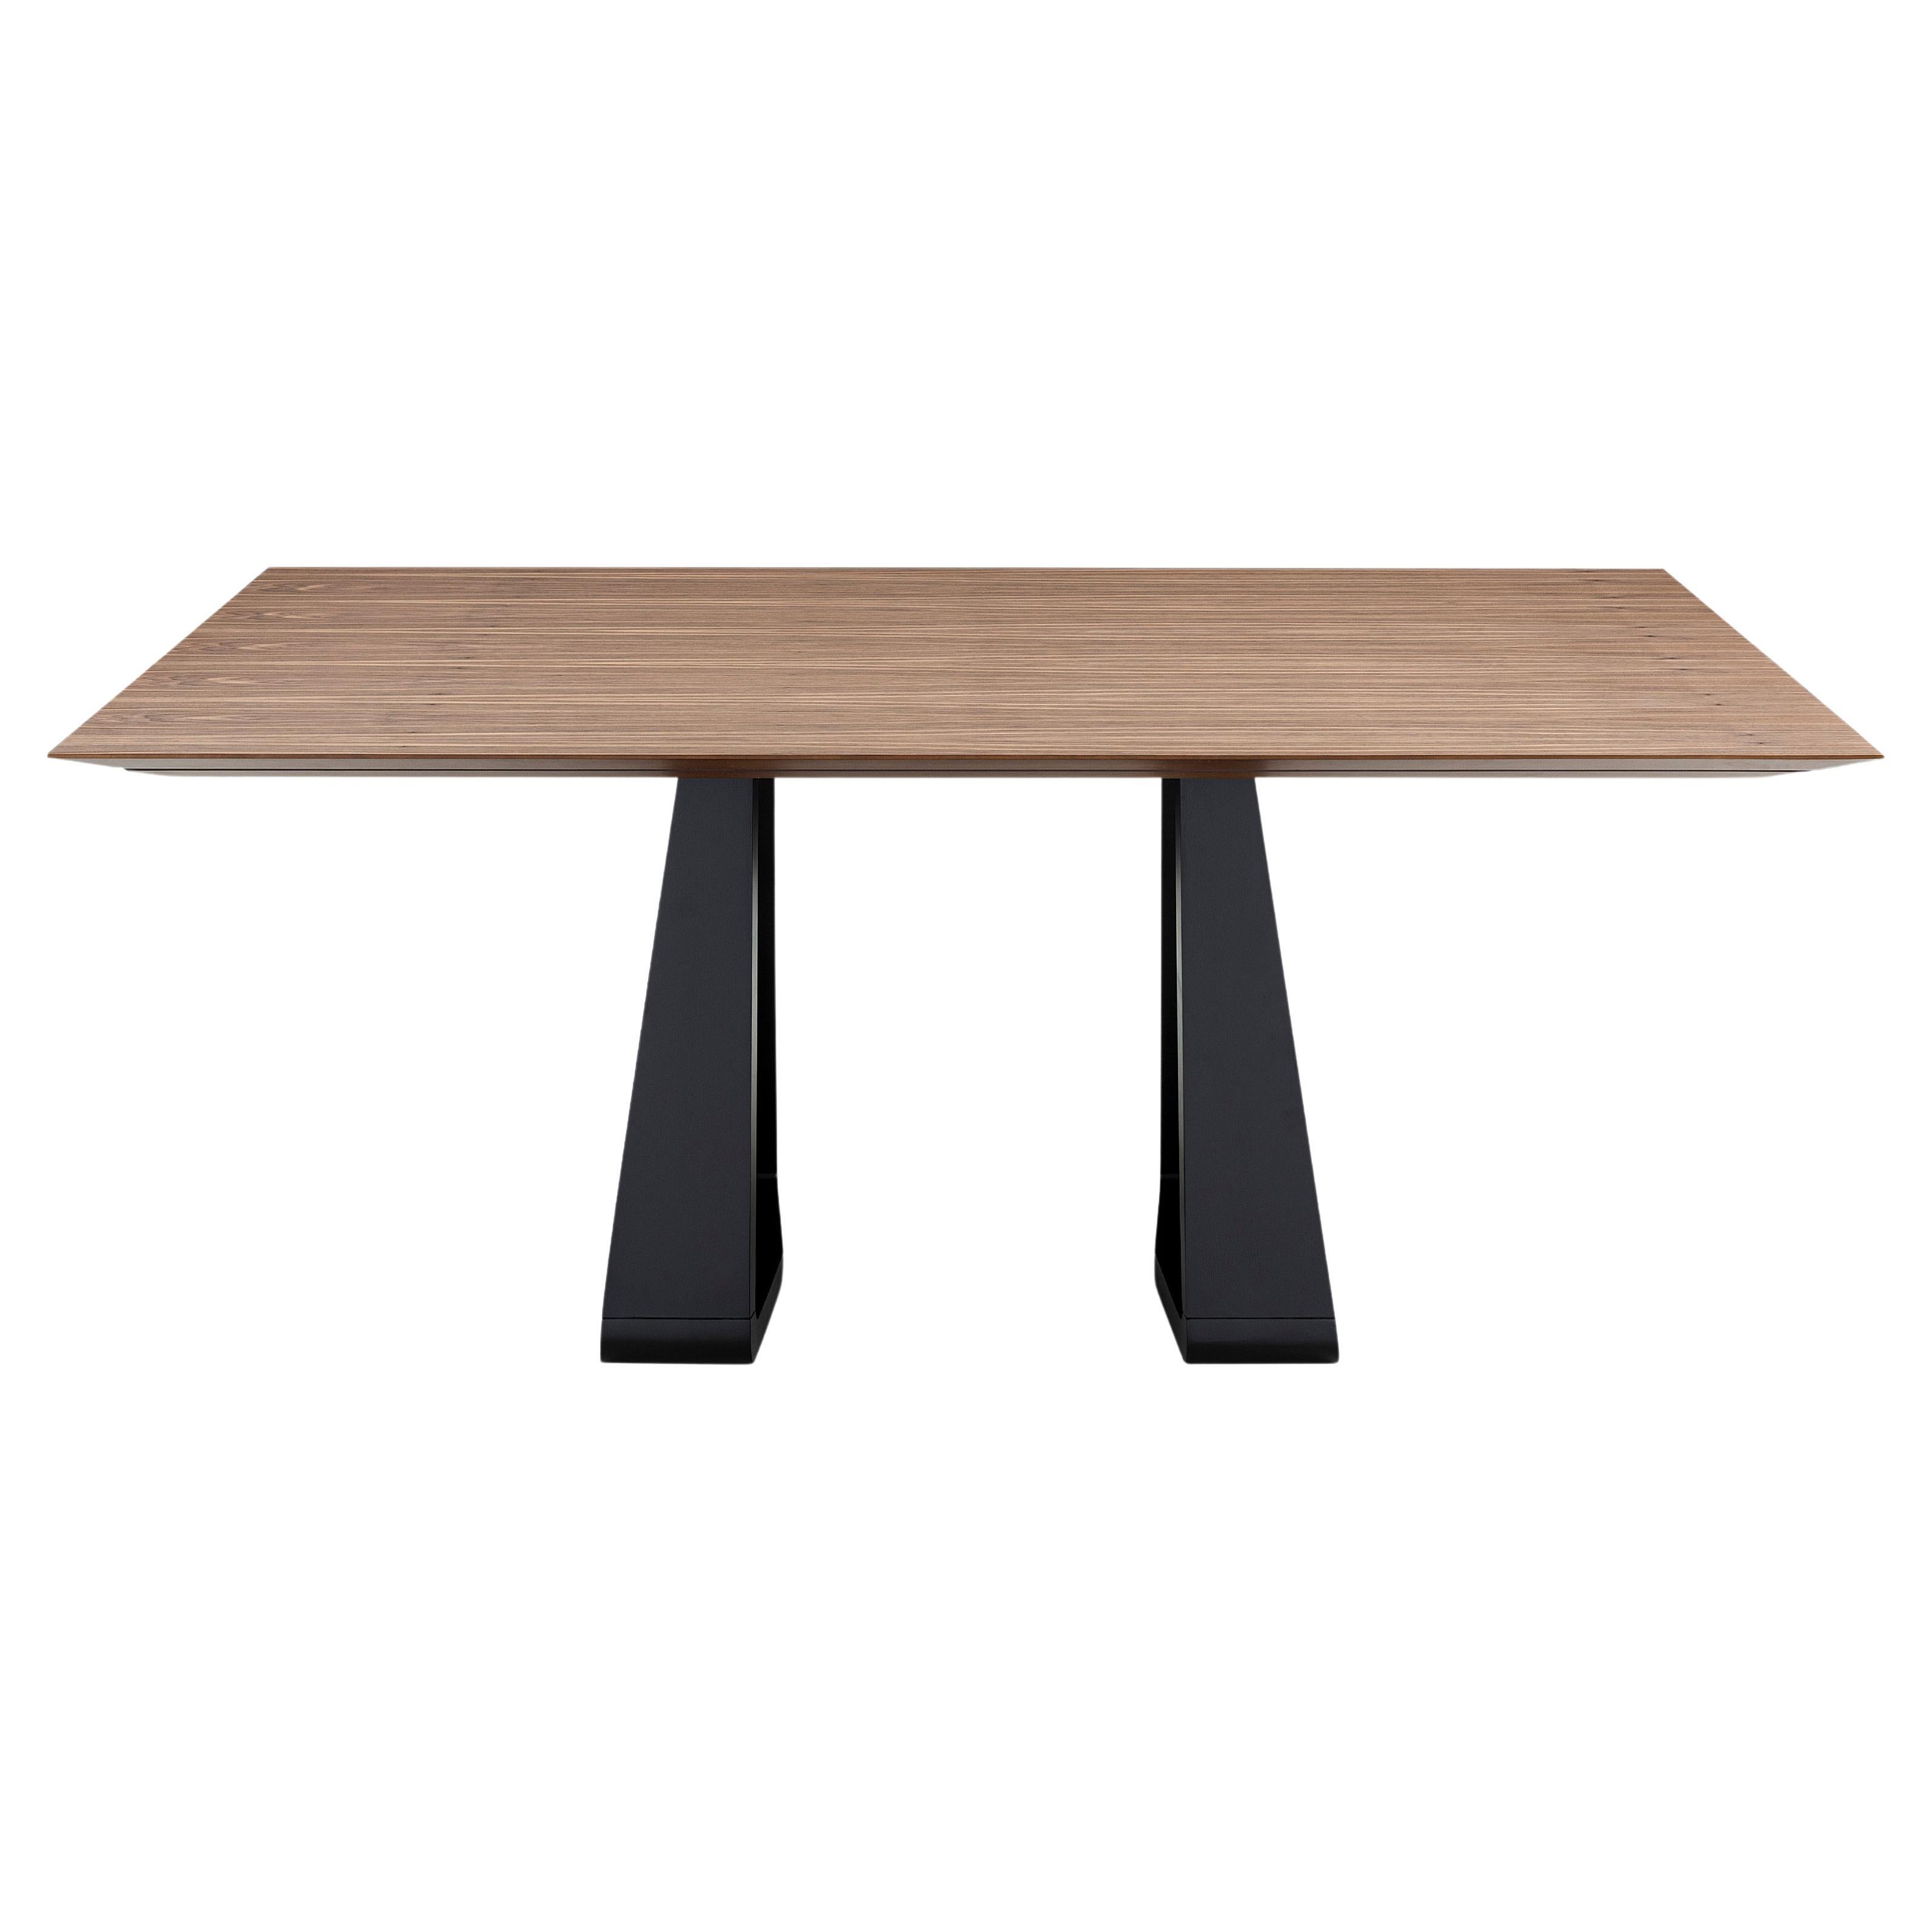 The Wing dining table is a beautiful chamfered piece in a walnut veneered table top and a minimalist graphite black base. Combining all these details the amazing Uultis team has created this dining table for any type of decor at your home because of